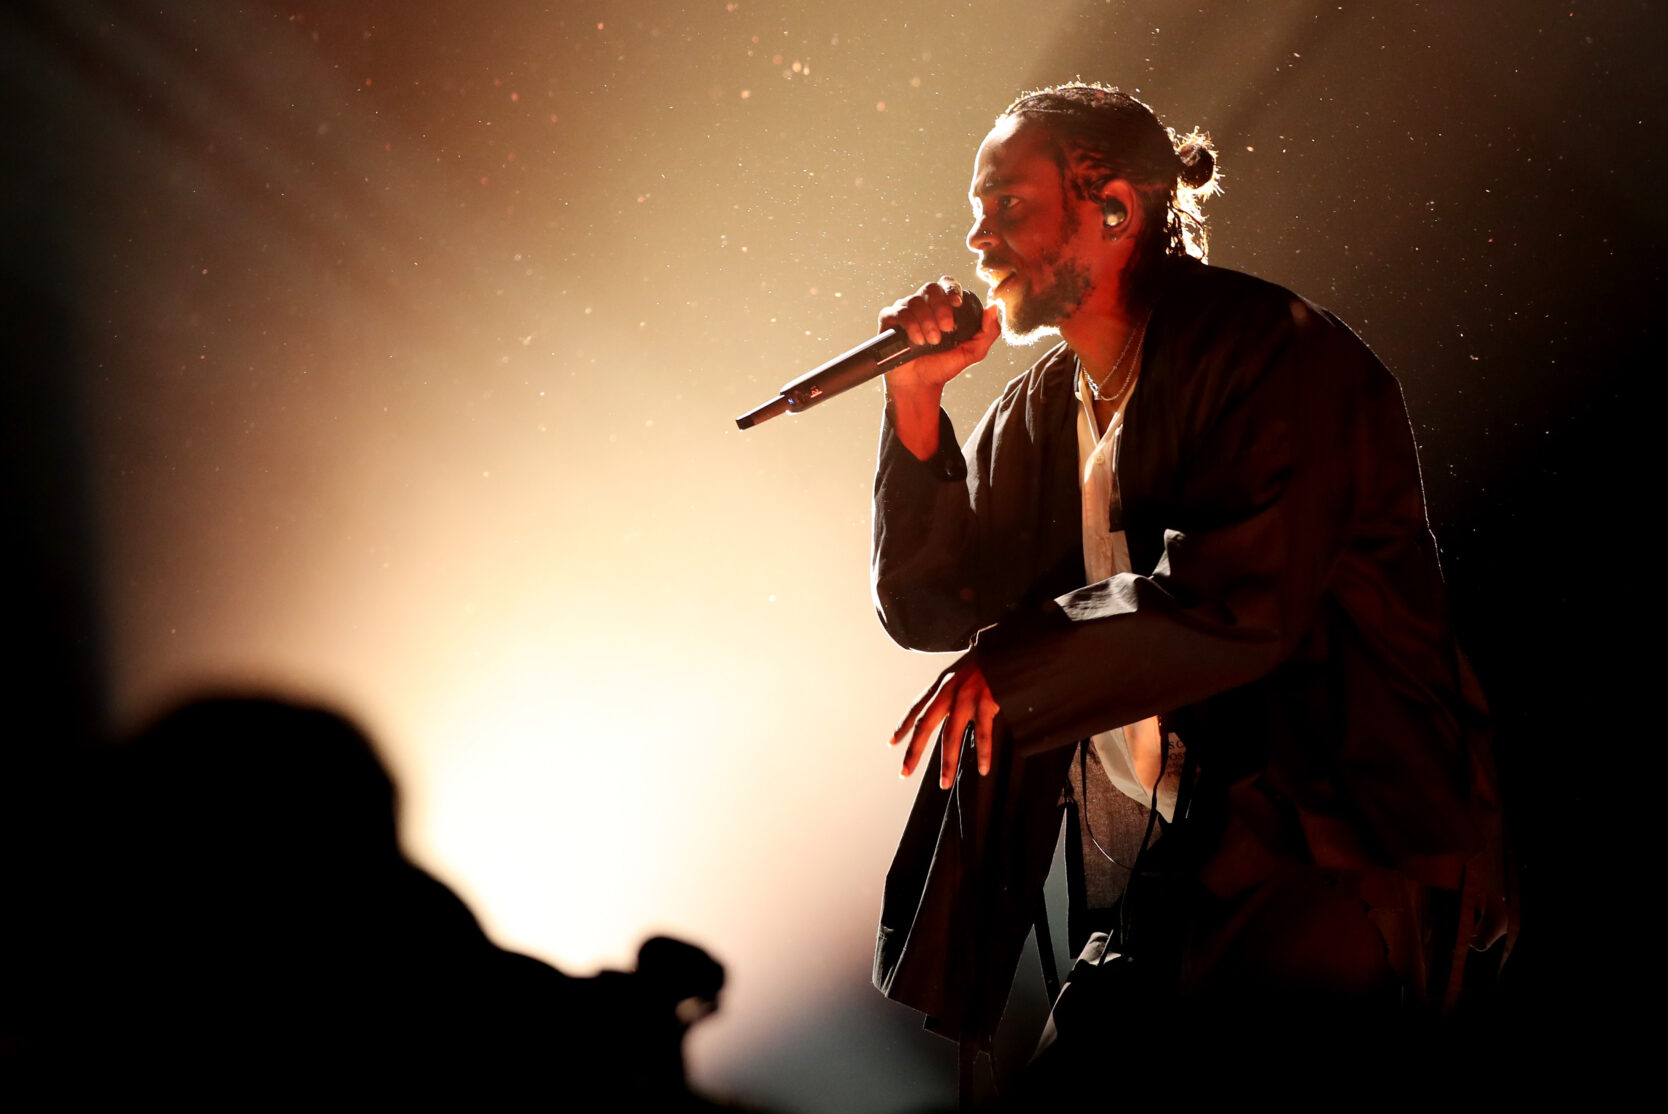 Kendrick Lamar Live in Paris on the Mr. Morale and The Big